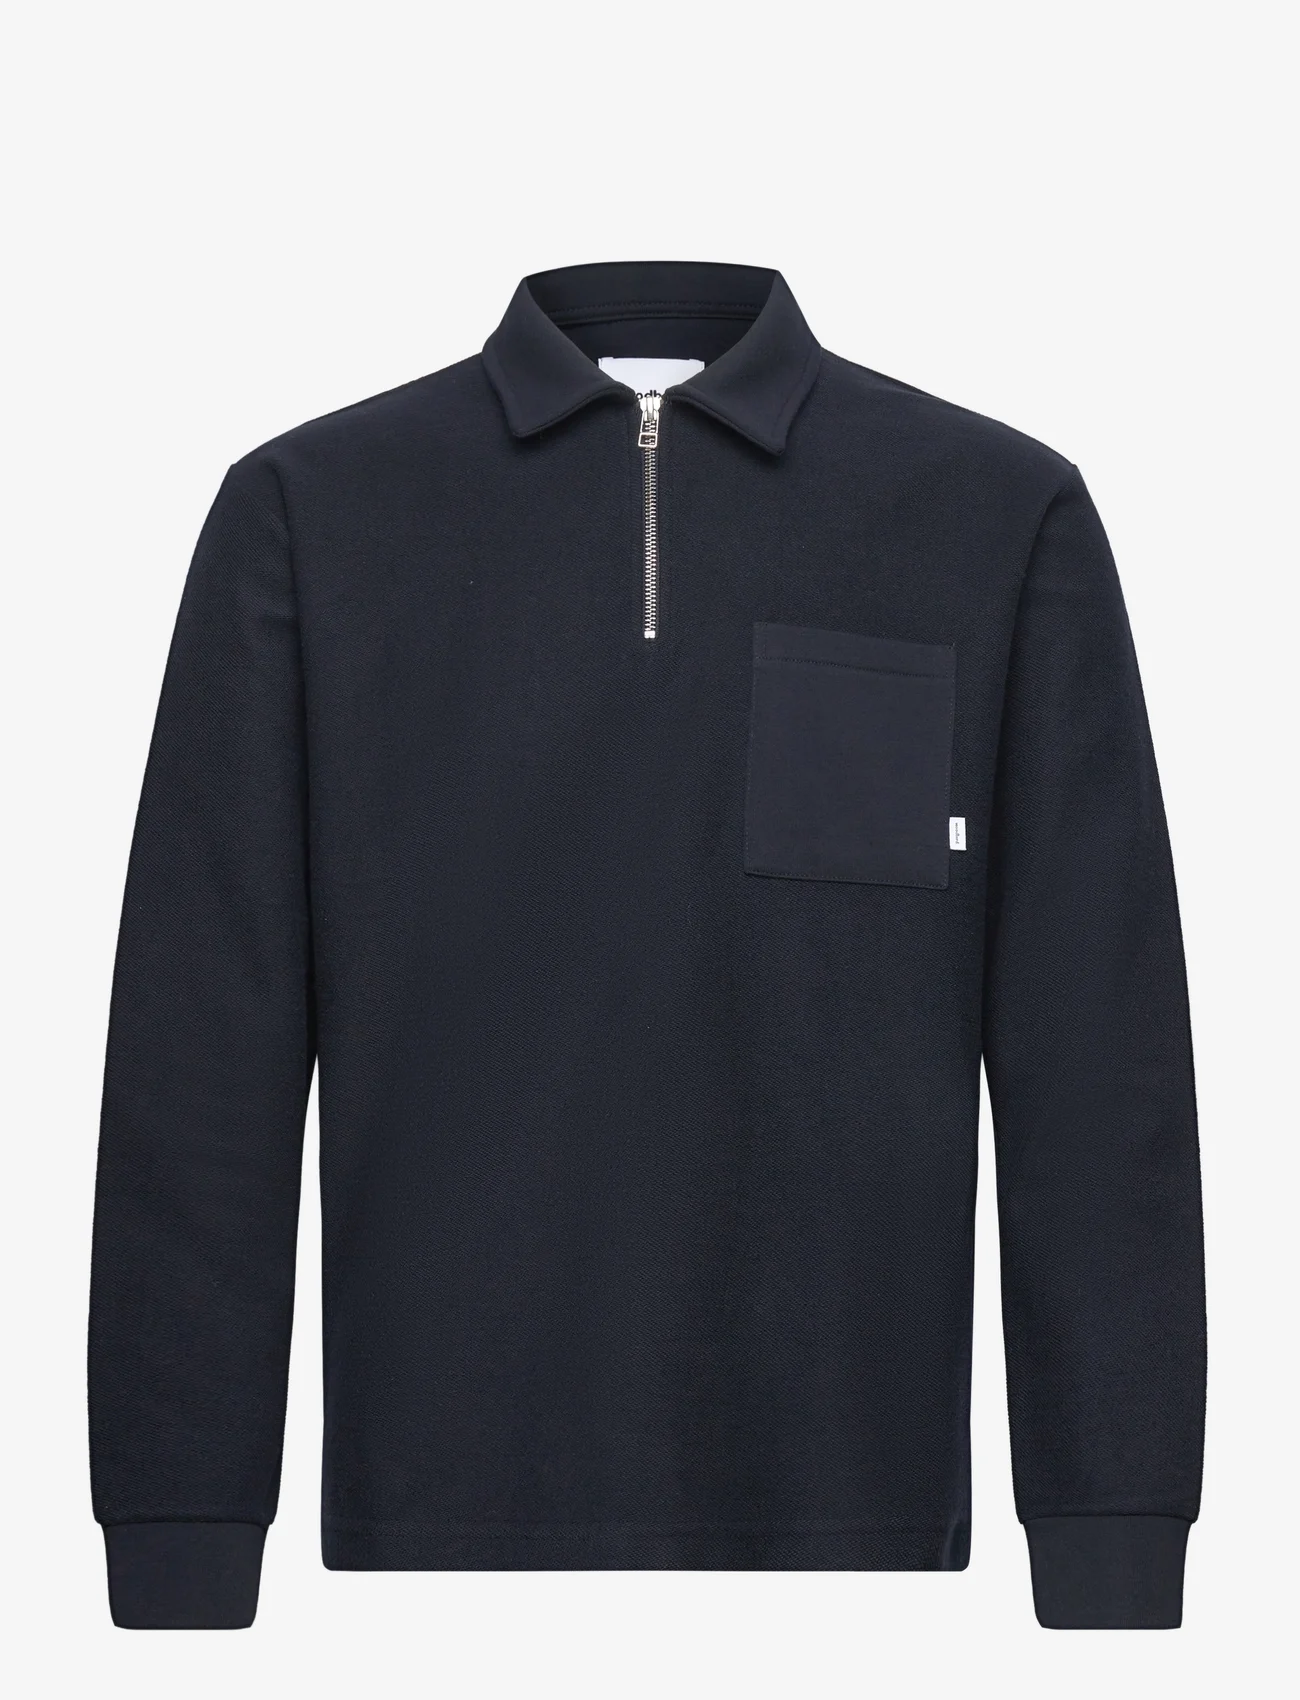 Woodbird - Alter Polo Sweat - knitted polos - navy - 0